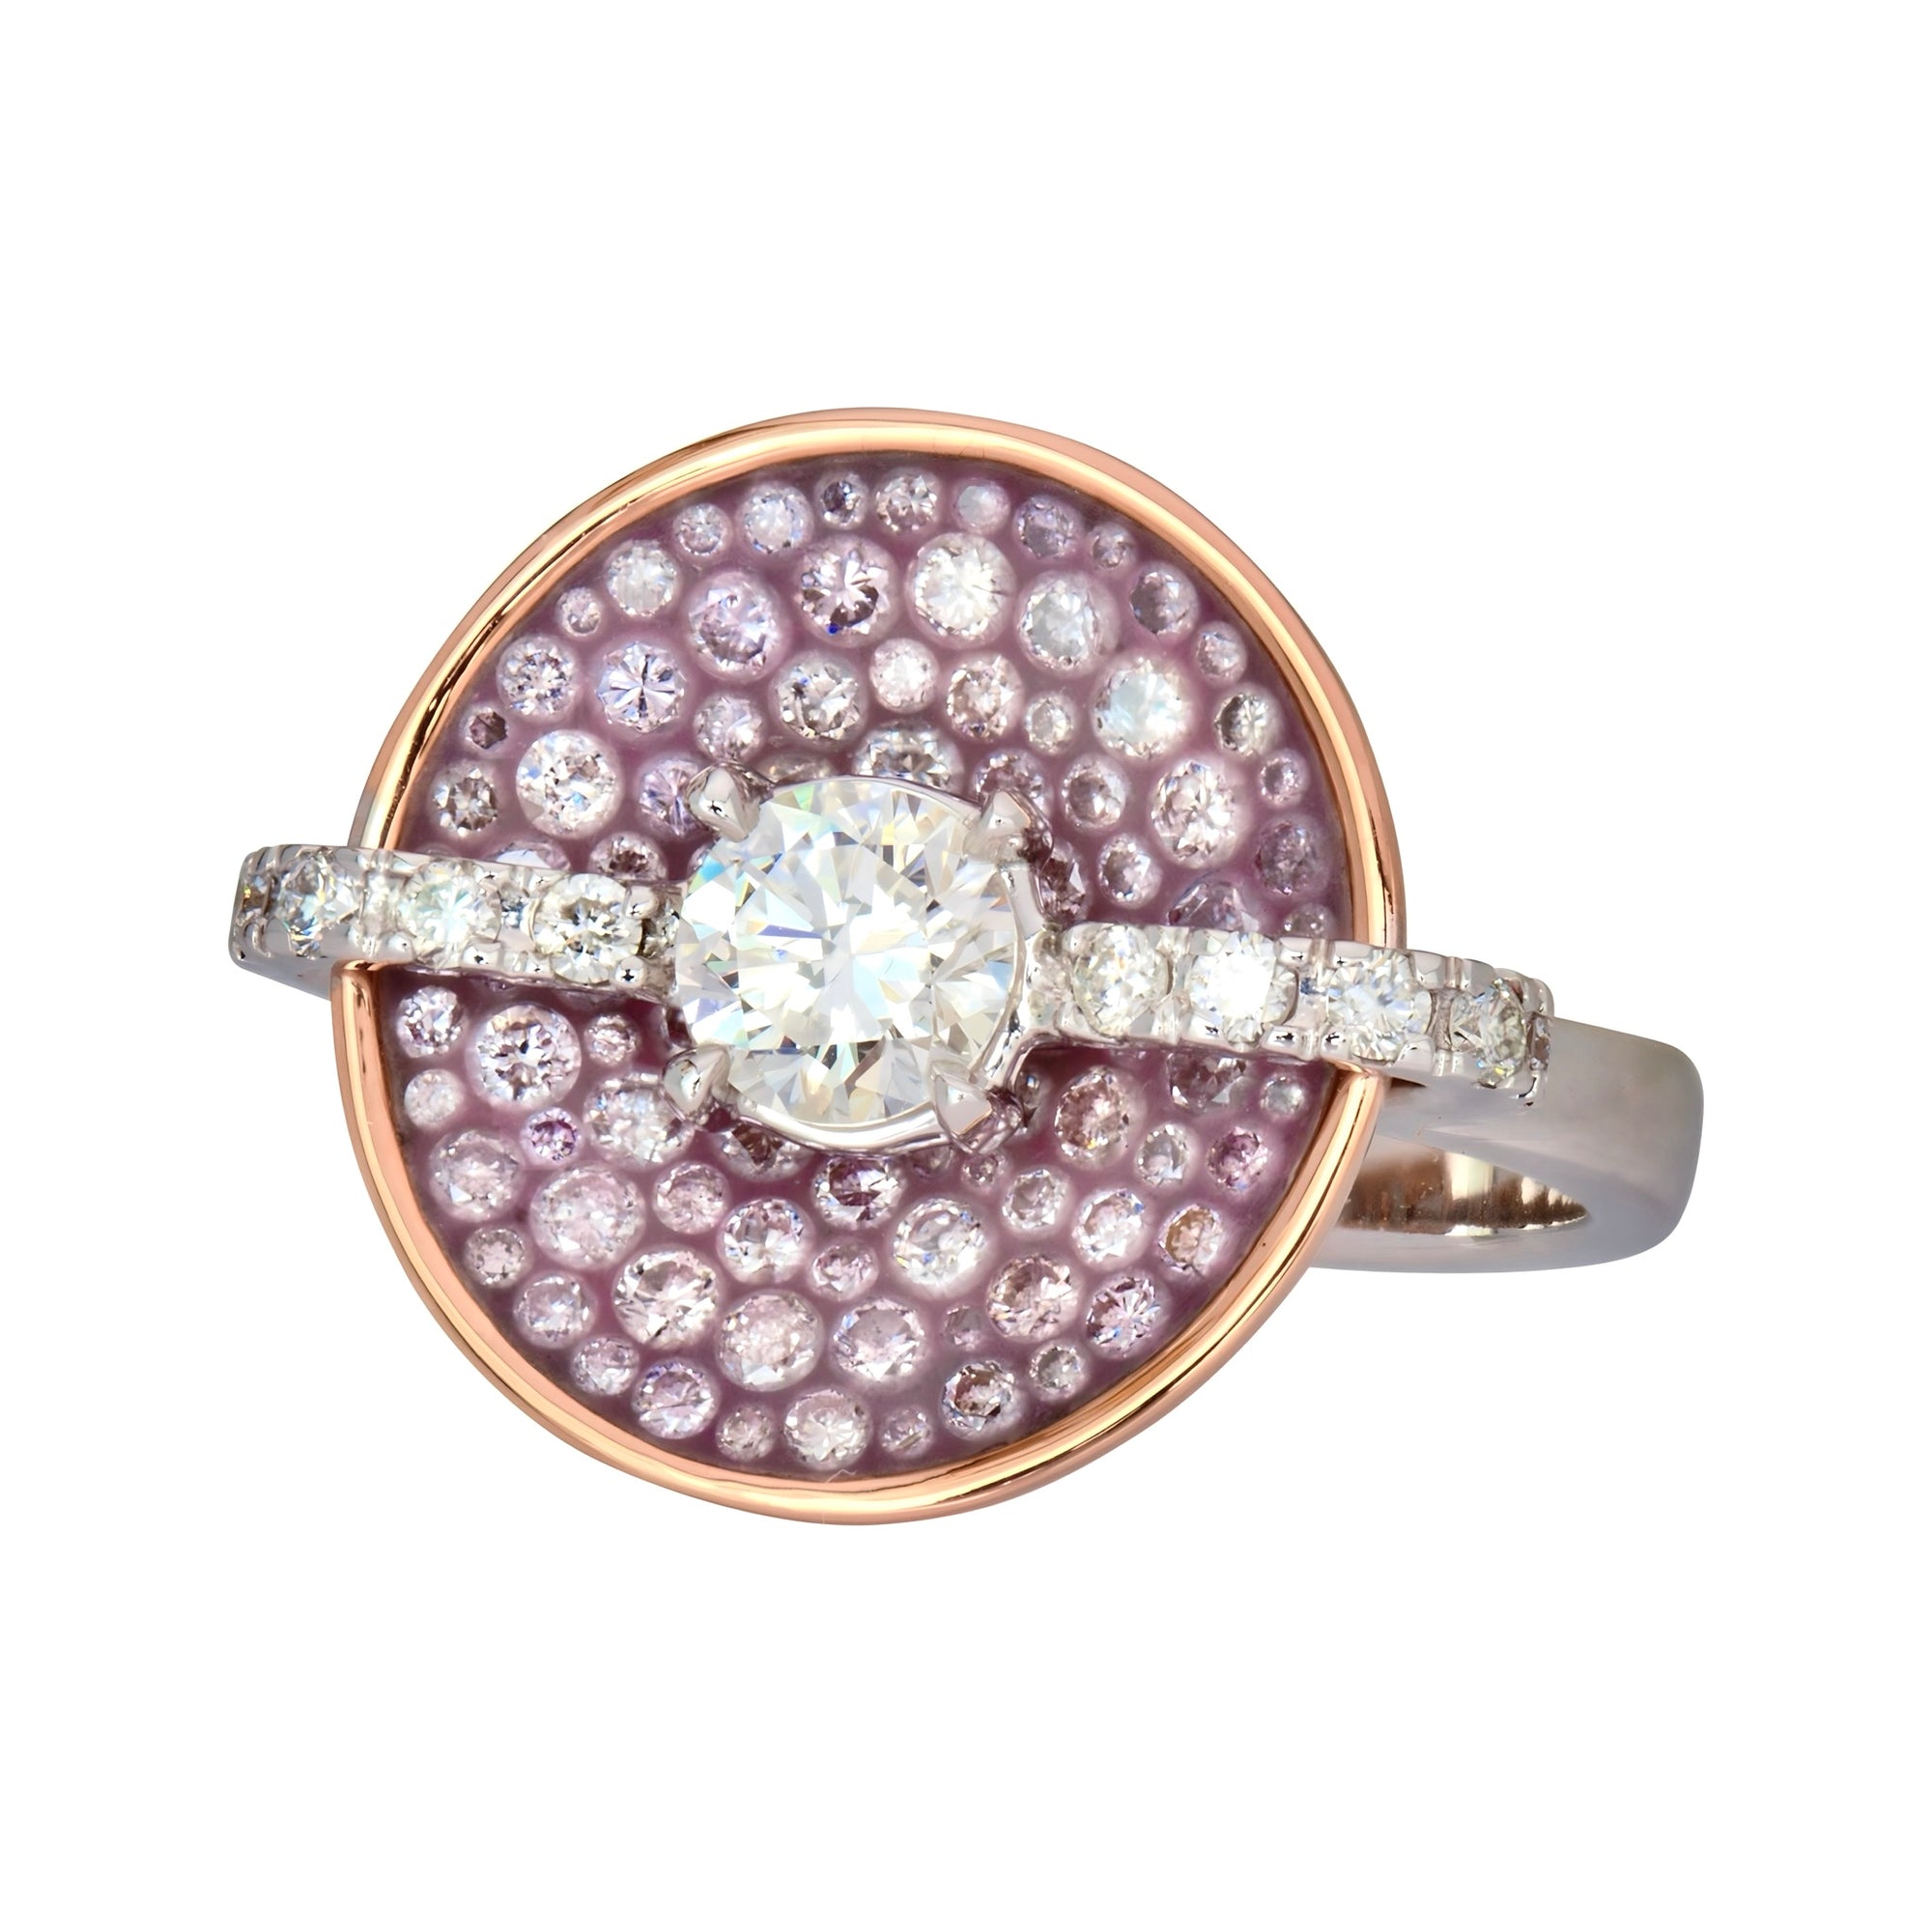 Pink and White Diamond Opus Ring in 18k available at Talisman Collection Fine Jewelers in El Dorado Hills, CA and online. Specs: 1.70 cttw diamonds and 18k gold. 